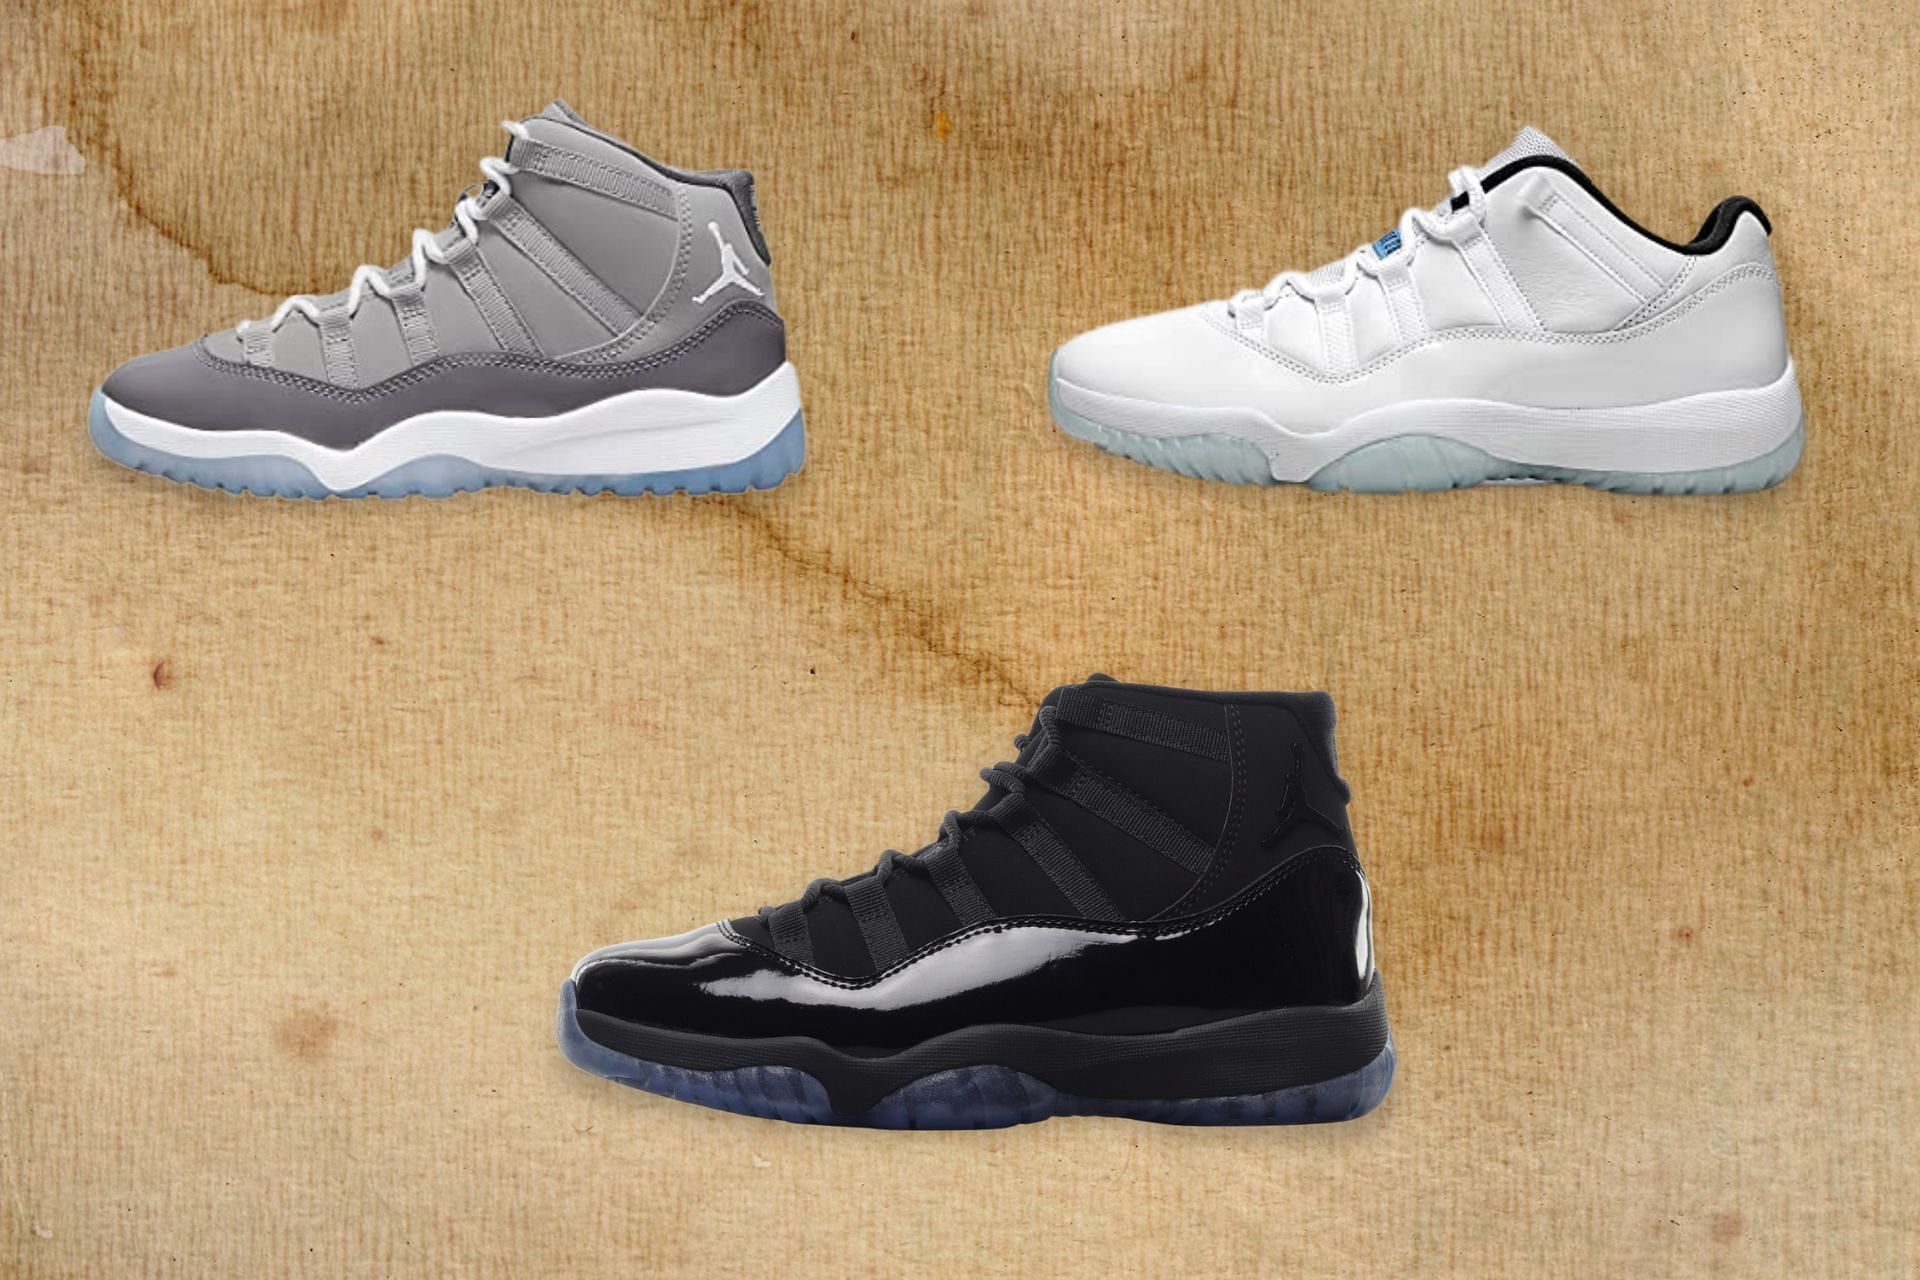 Air Jordan 11 History: Its Significance in Sneaker Culture